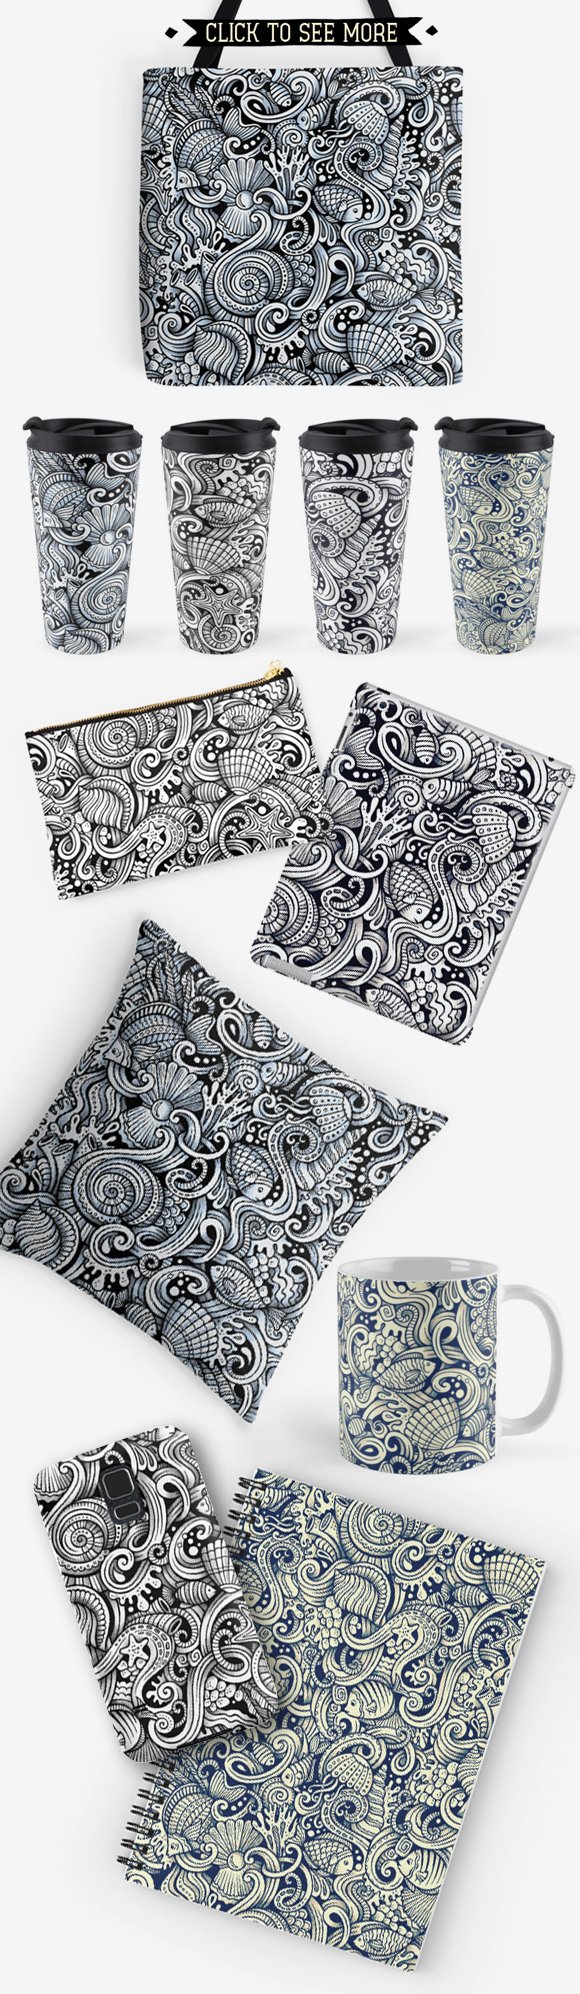 Cool prints on pillows, cups, covers and more.